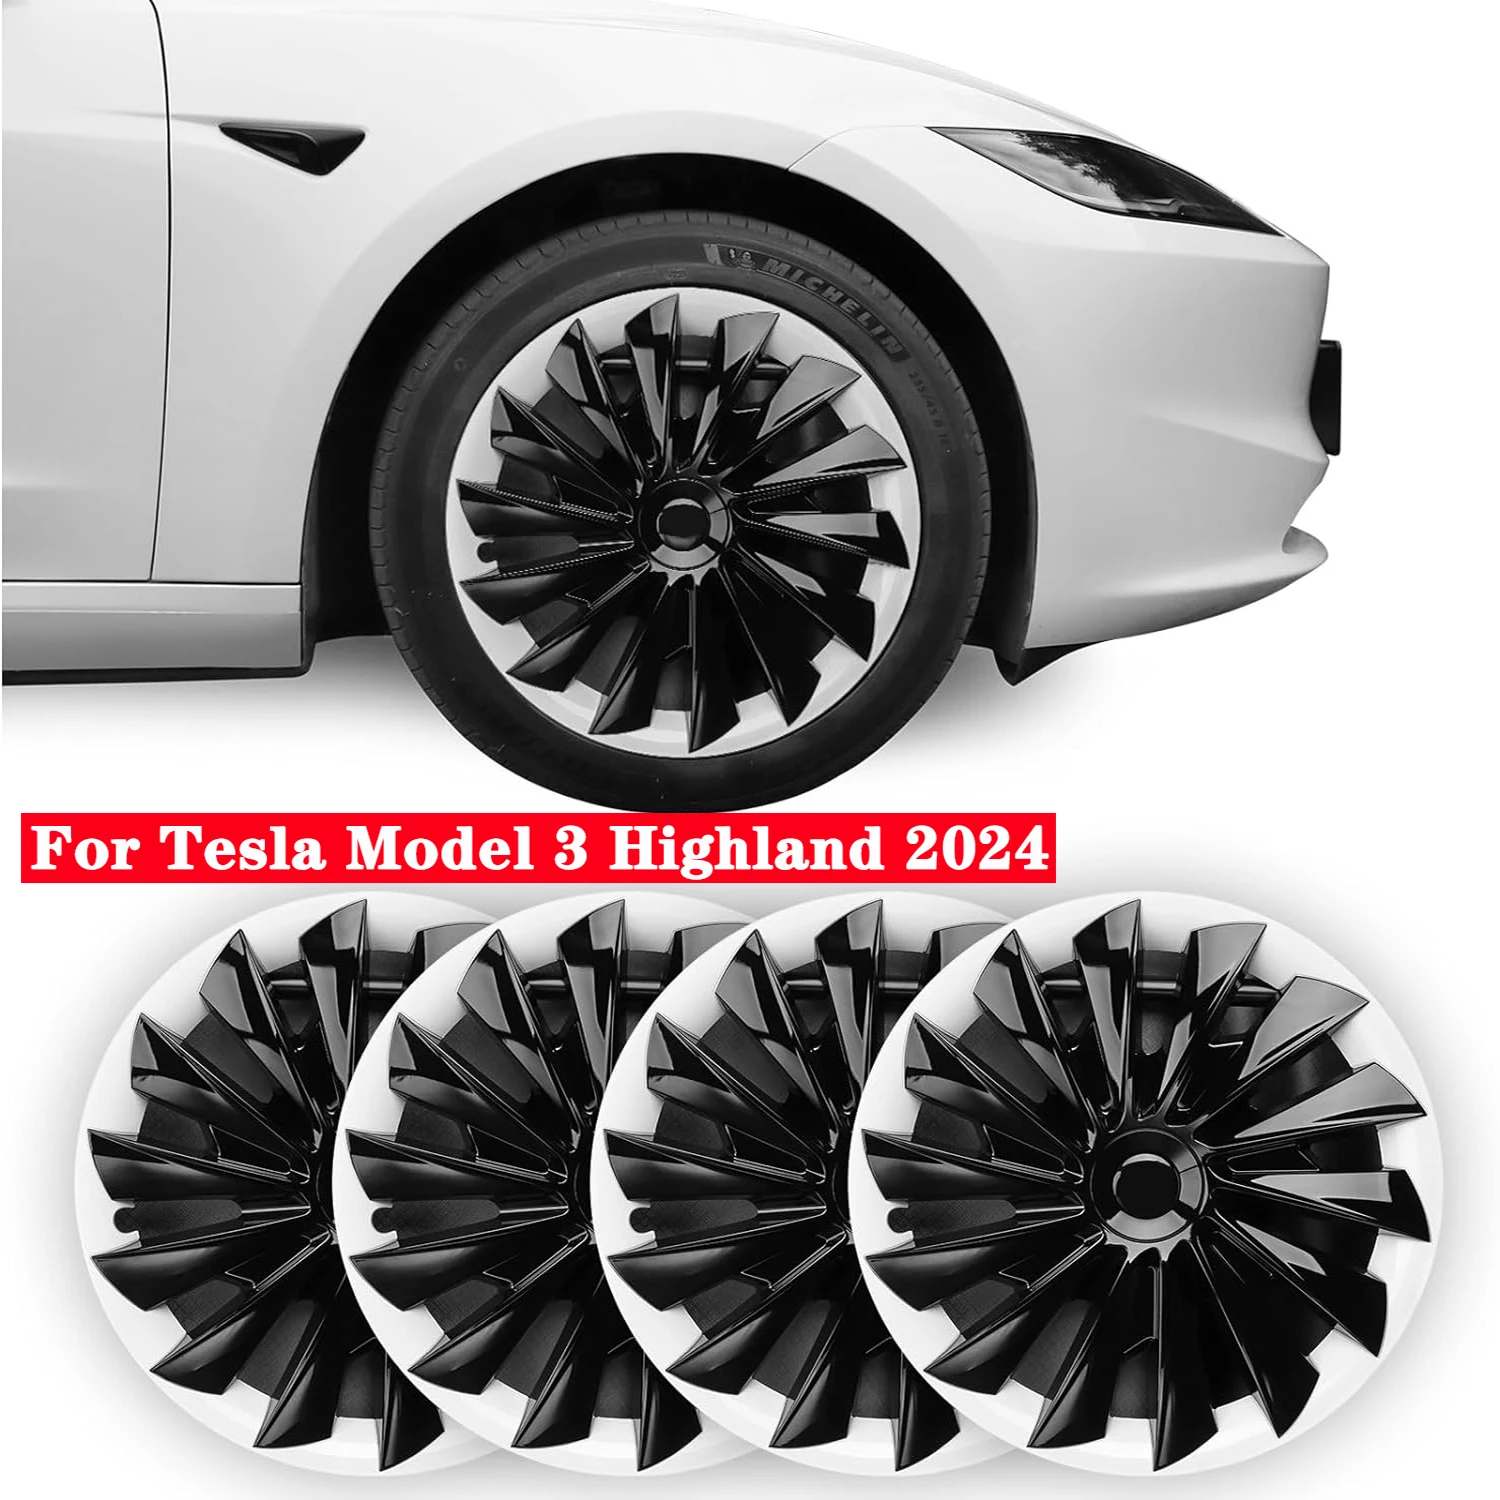 

4PCS Hubcaps For Tesla Model 3 Highland 2024, 18 Inch White Sword Shadow Style Wheel Covers Hub Caps Replacement Rims Protector